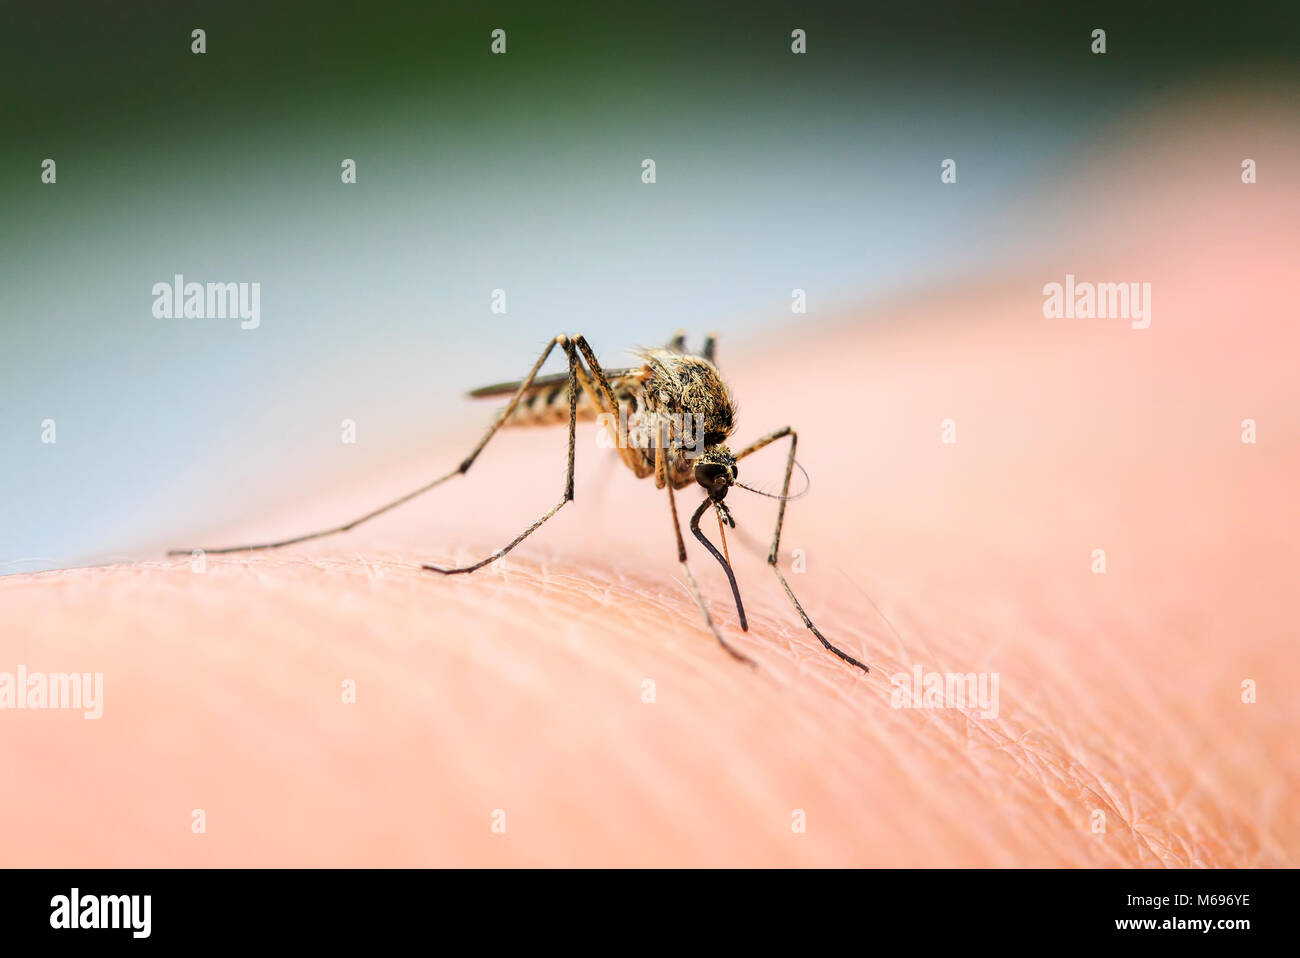 nasty insect mosquito sitting on her hand and drinks the blood of the pierced skin Stock Photo